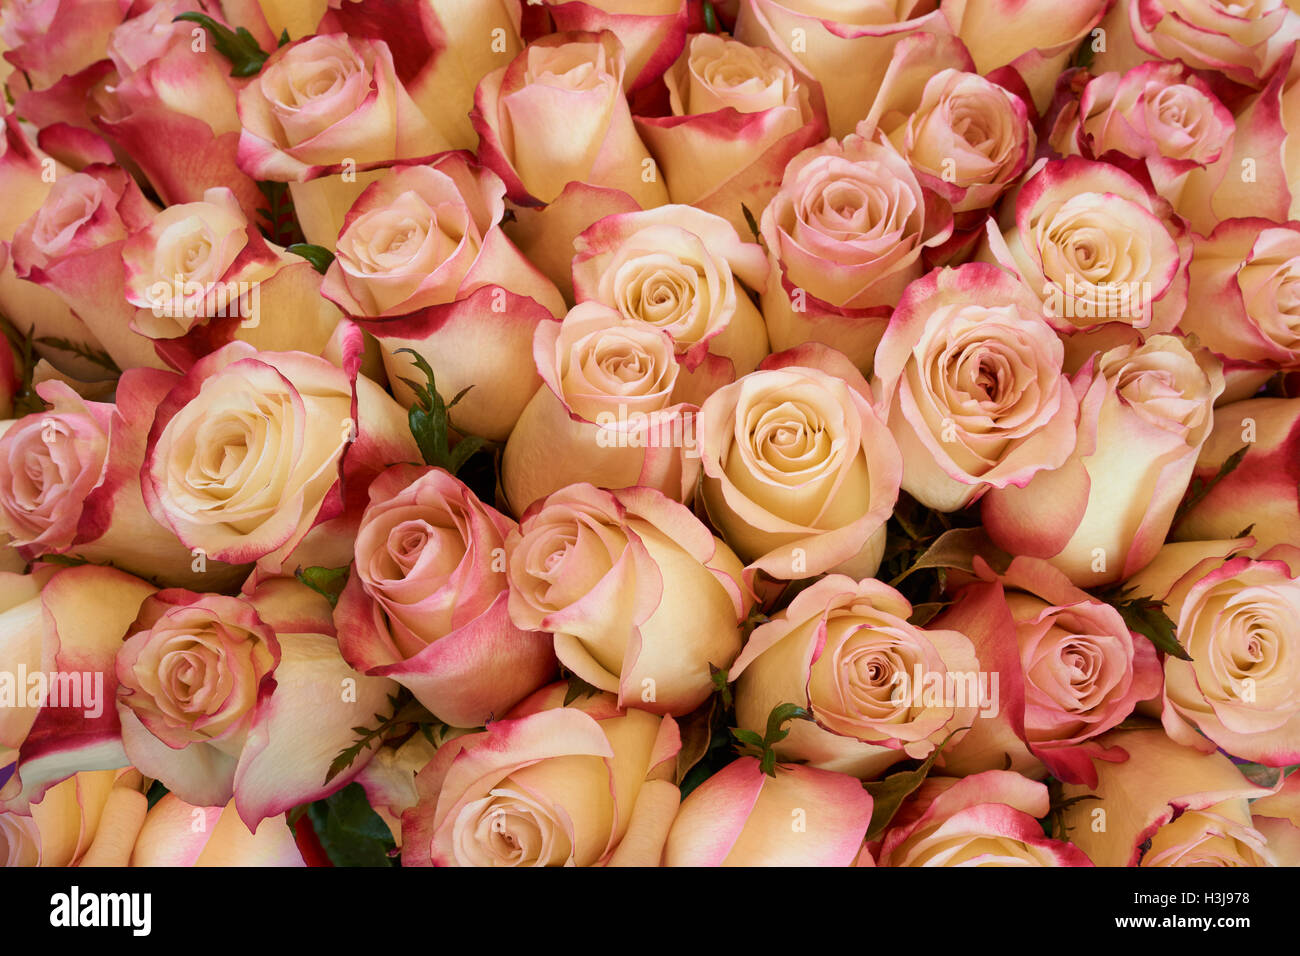 Heap of beautiful roses as floral background Stock Photo